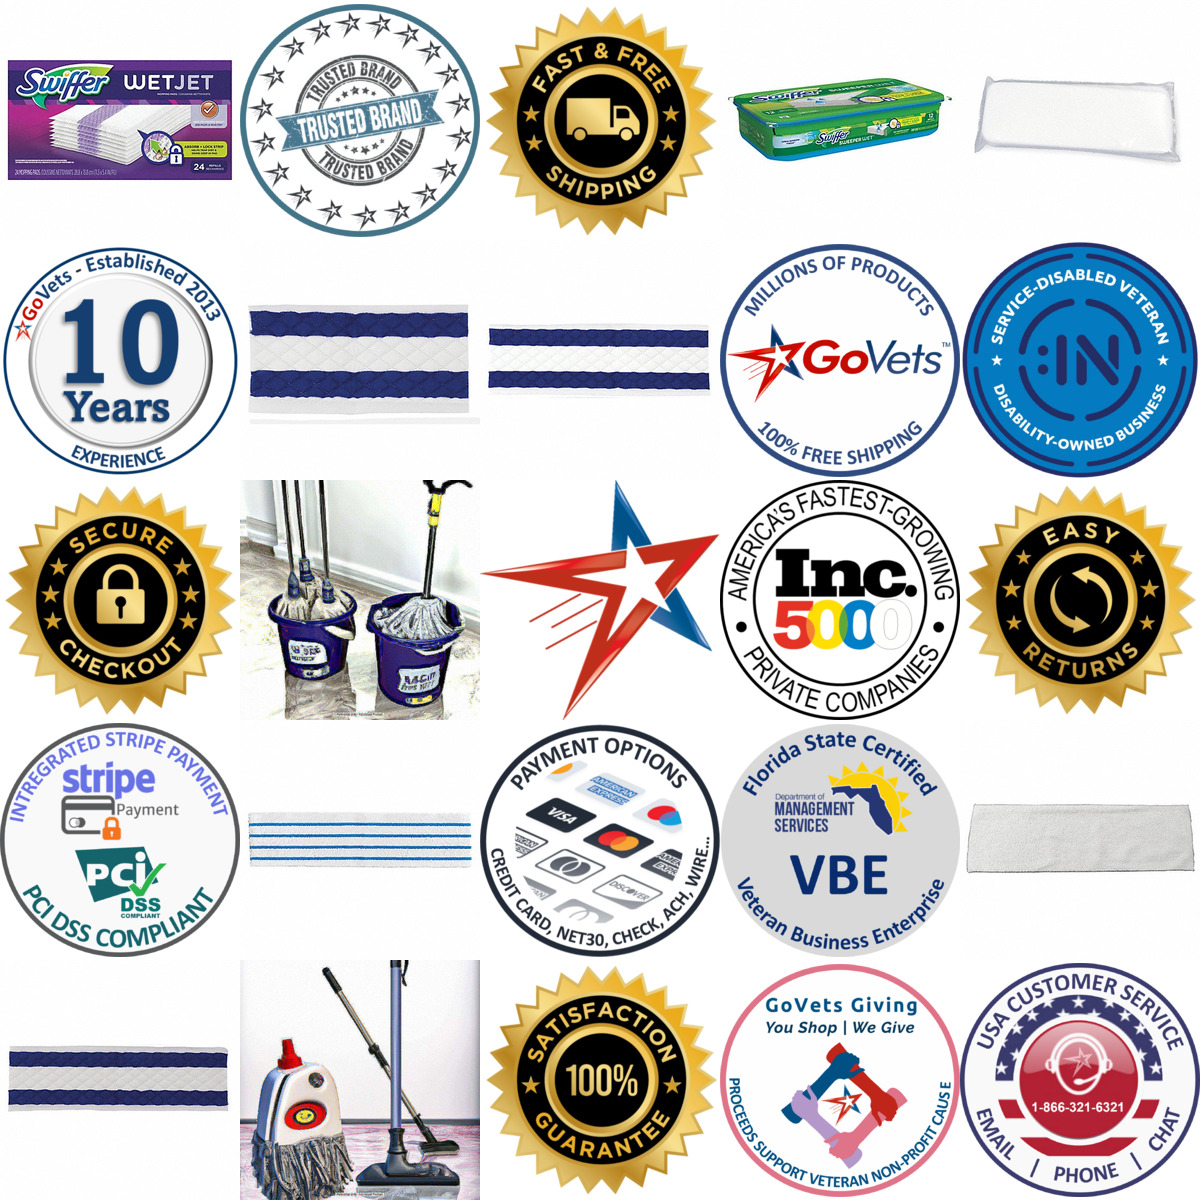 A selection of Disposable Mop Pads products on GoVets